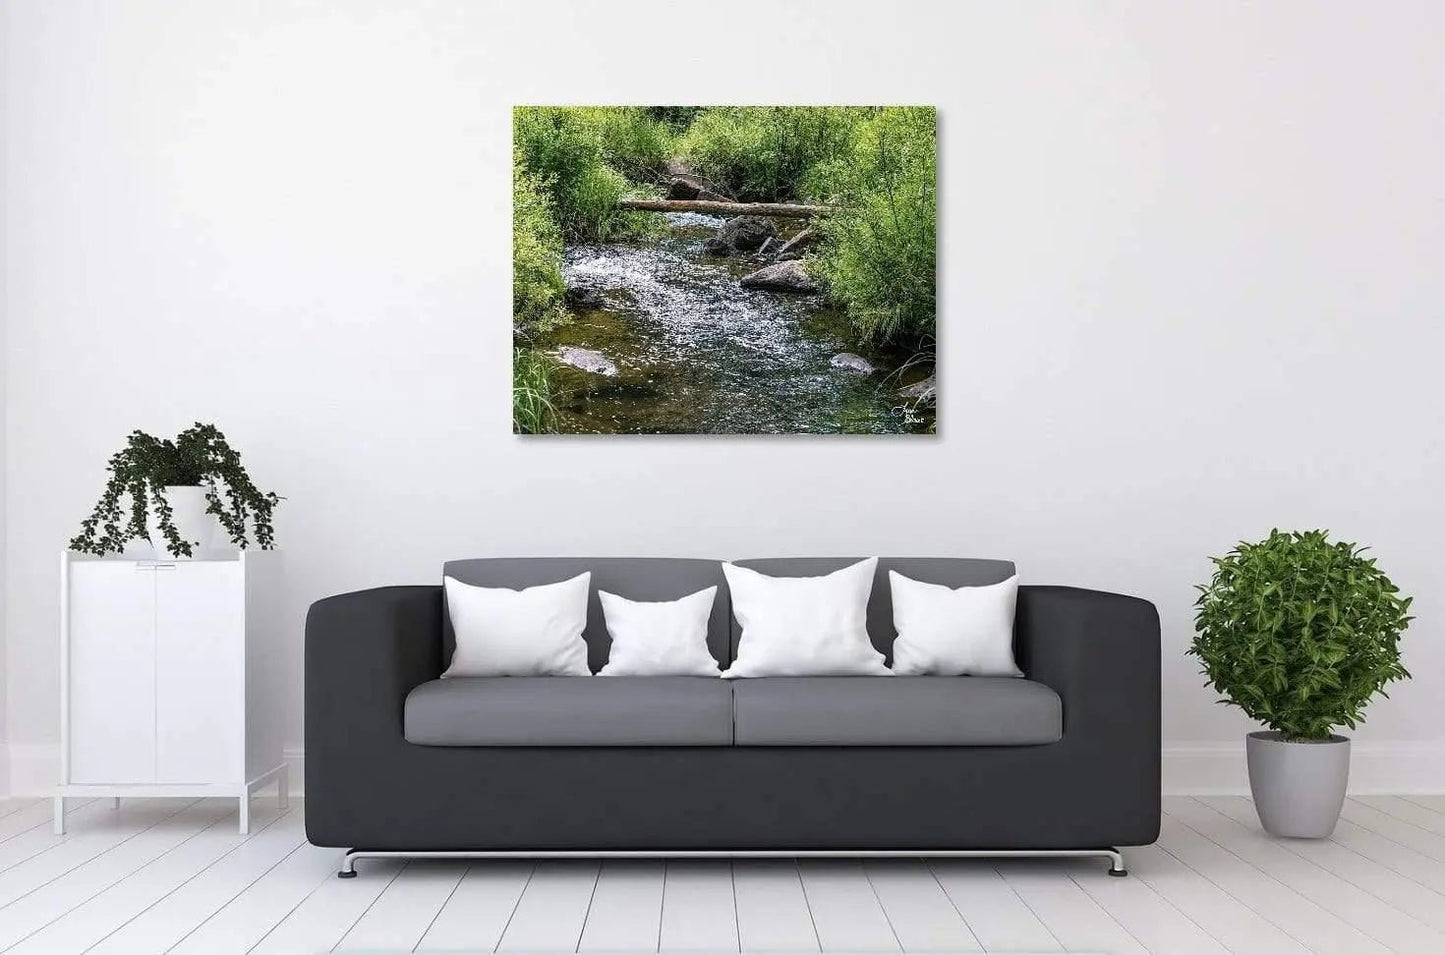 53x41 large wall green landscape in nature art over couch in room